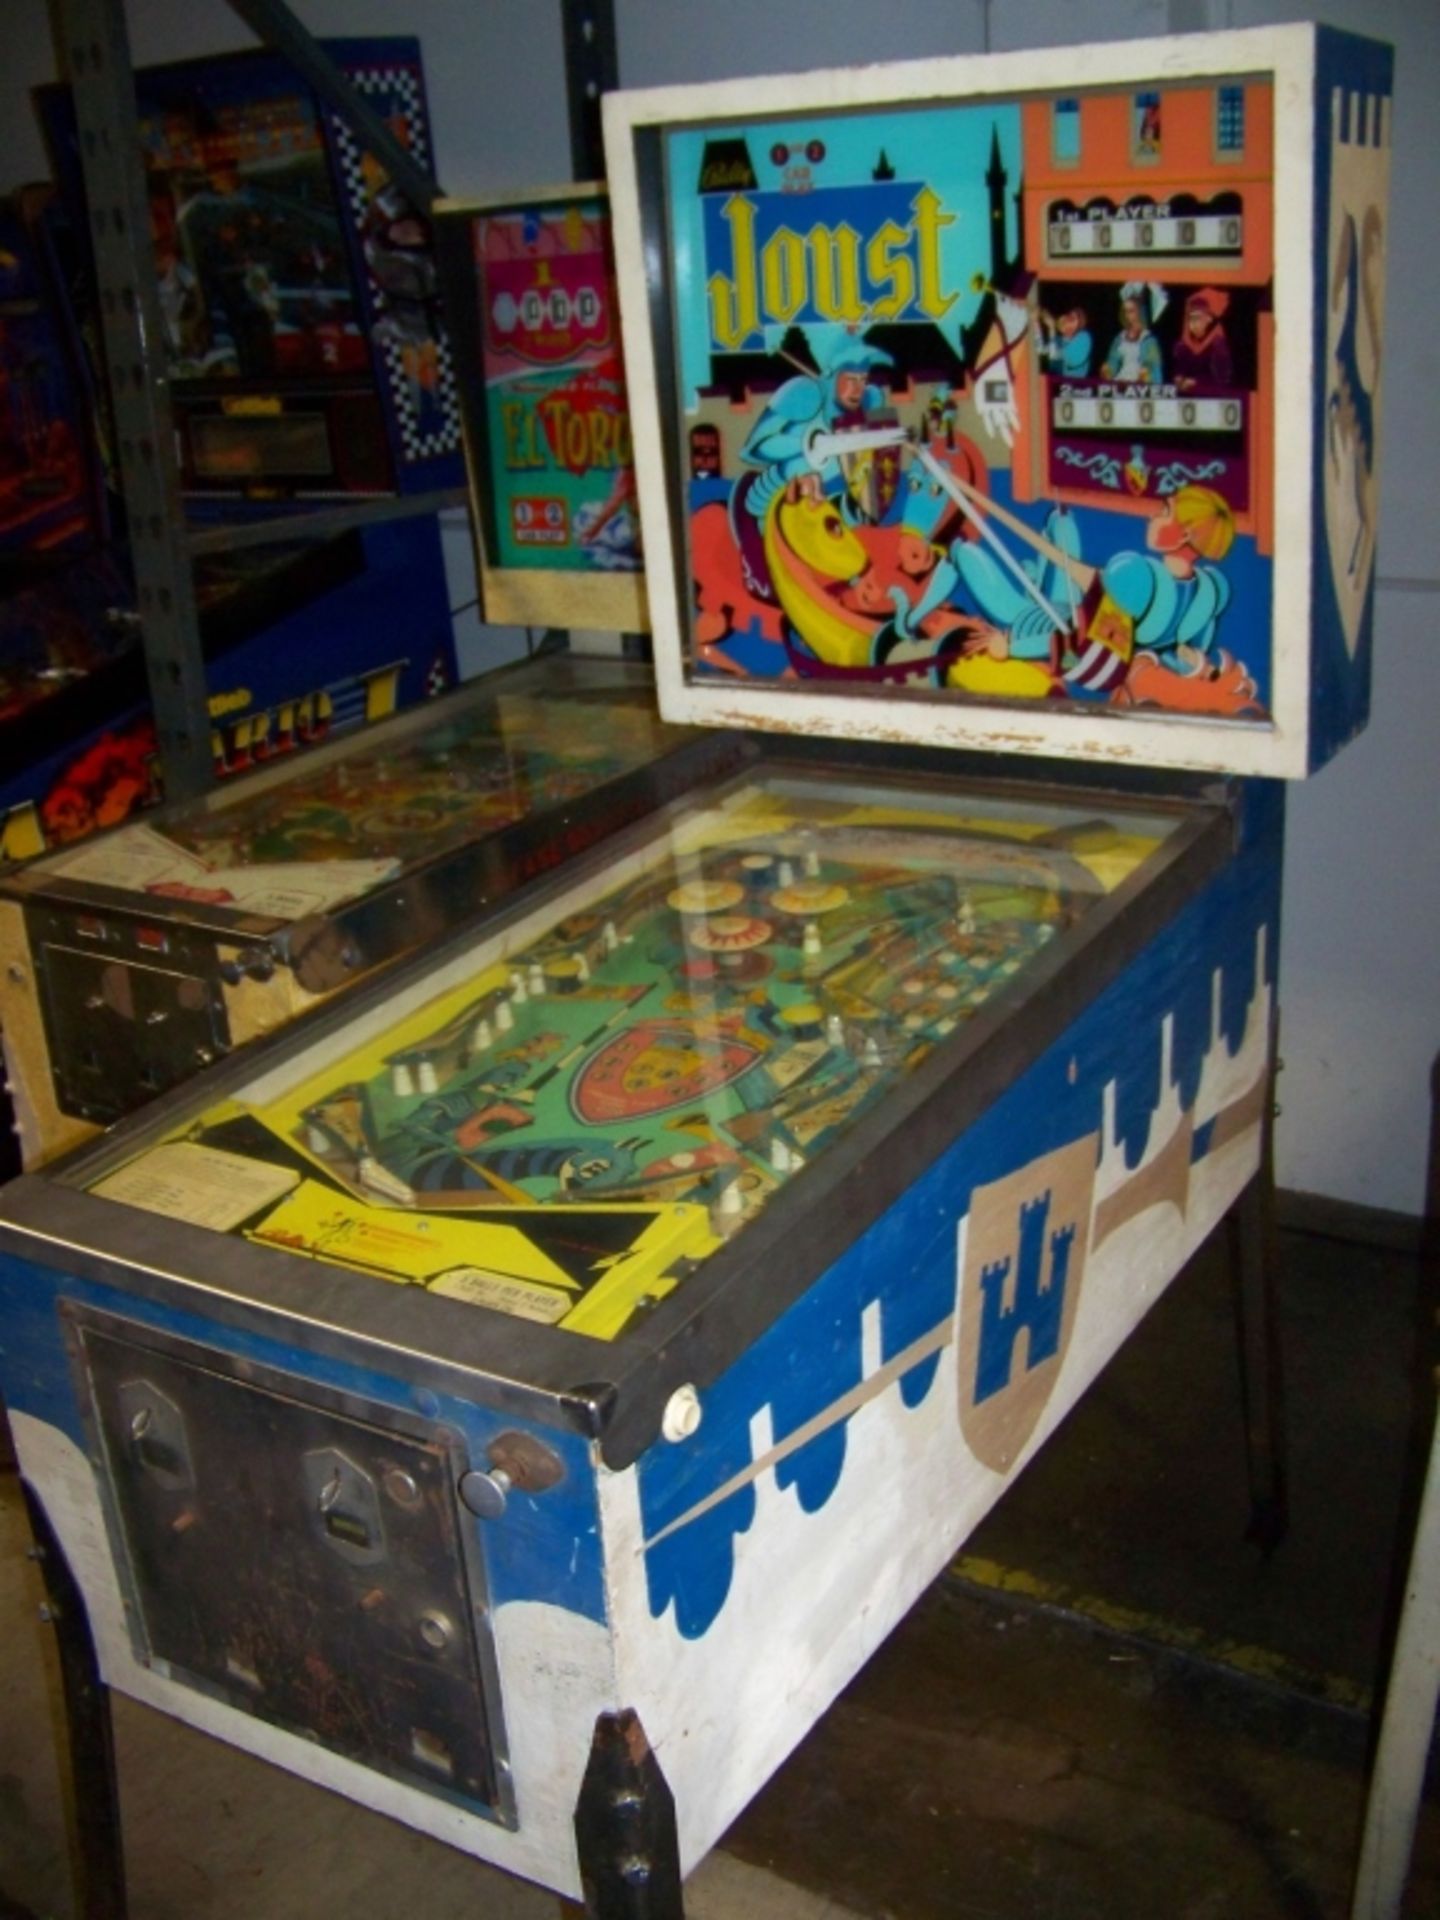 JOUST CLASSIC PINBALL MACHINE BALLY 1969 Item is in used condition. Evidence of wear and - Image 2 of 6